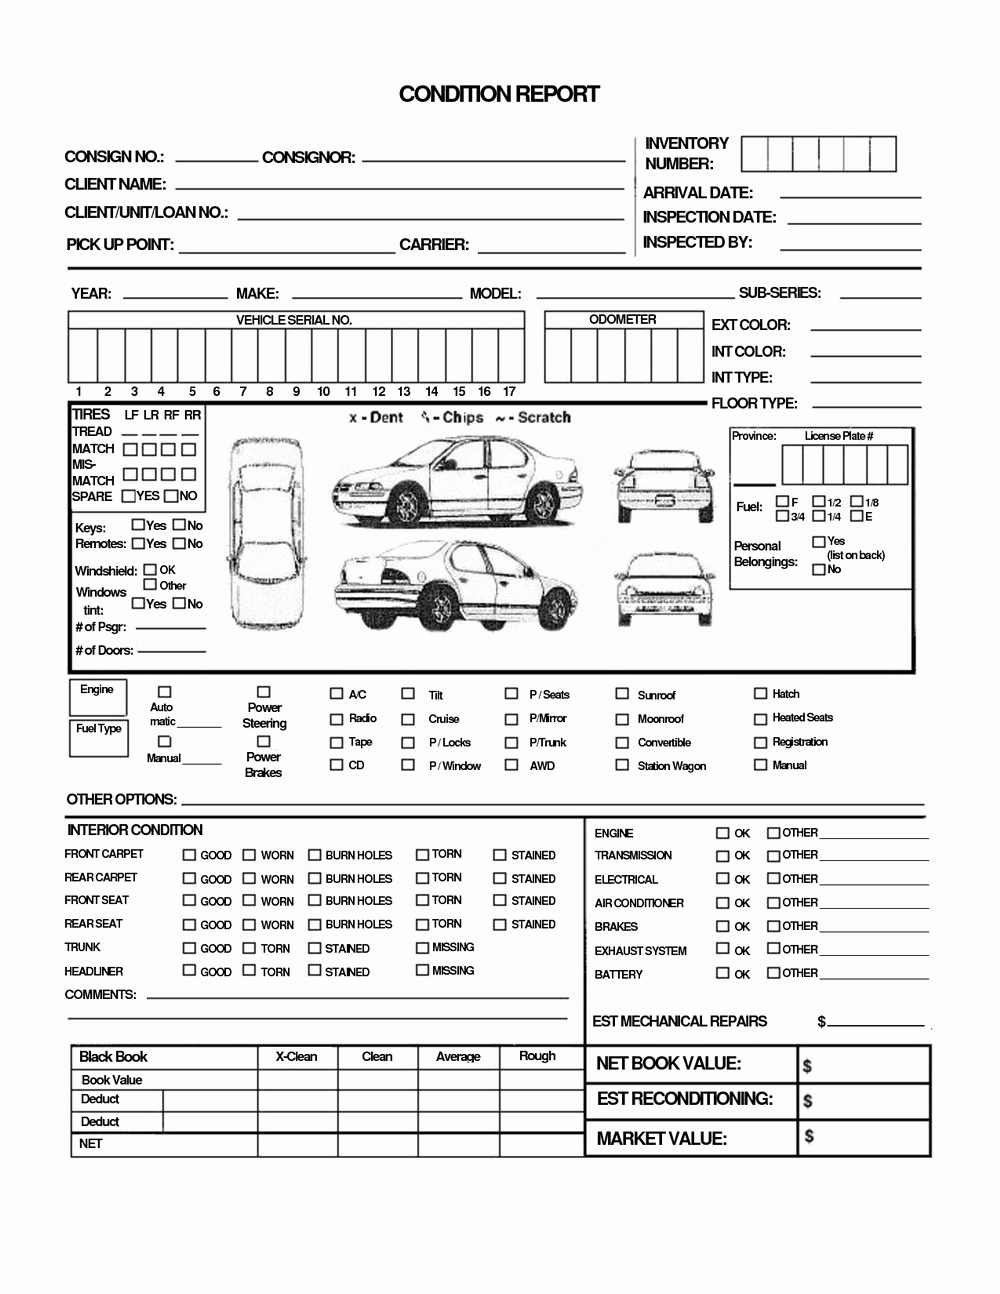 Free Printable Vehicle Condition Report Template Awesome Pre Trip Vehicle Inspection form Template